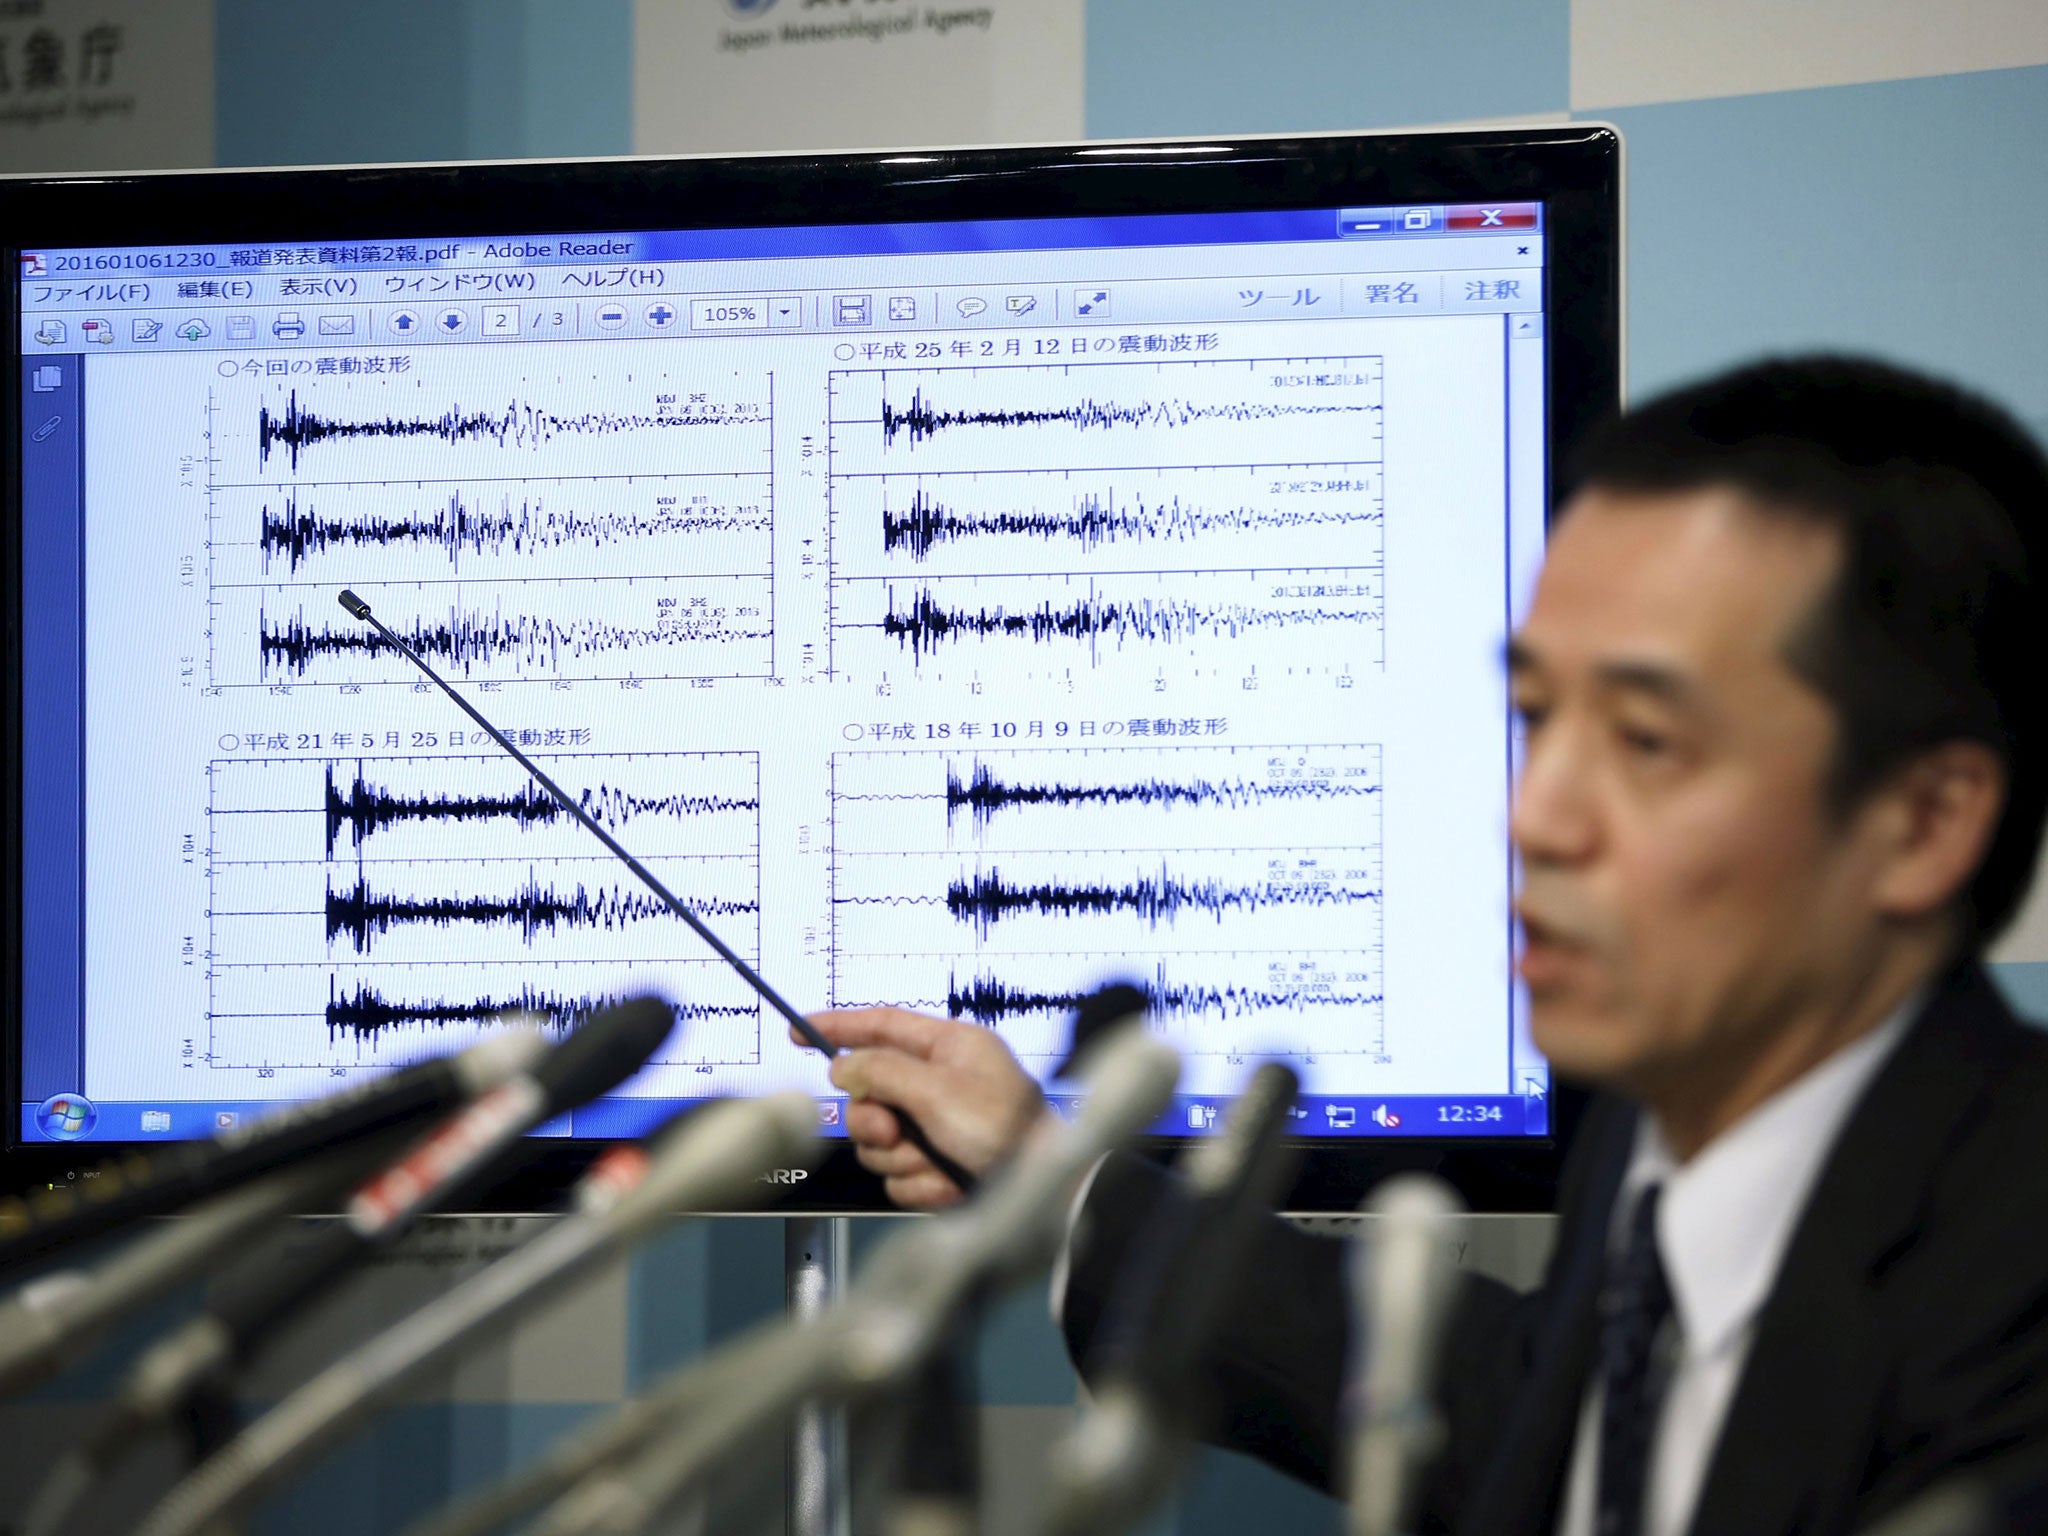 Japan Meteorological Agency's earthquake and tsunami observations division director Yohei Hasegawa points at a graph of ground motion waveform data observed in Japan